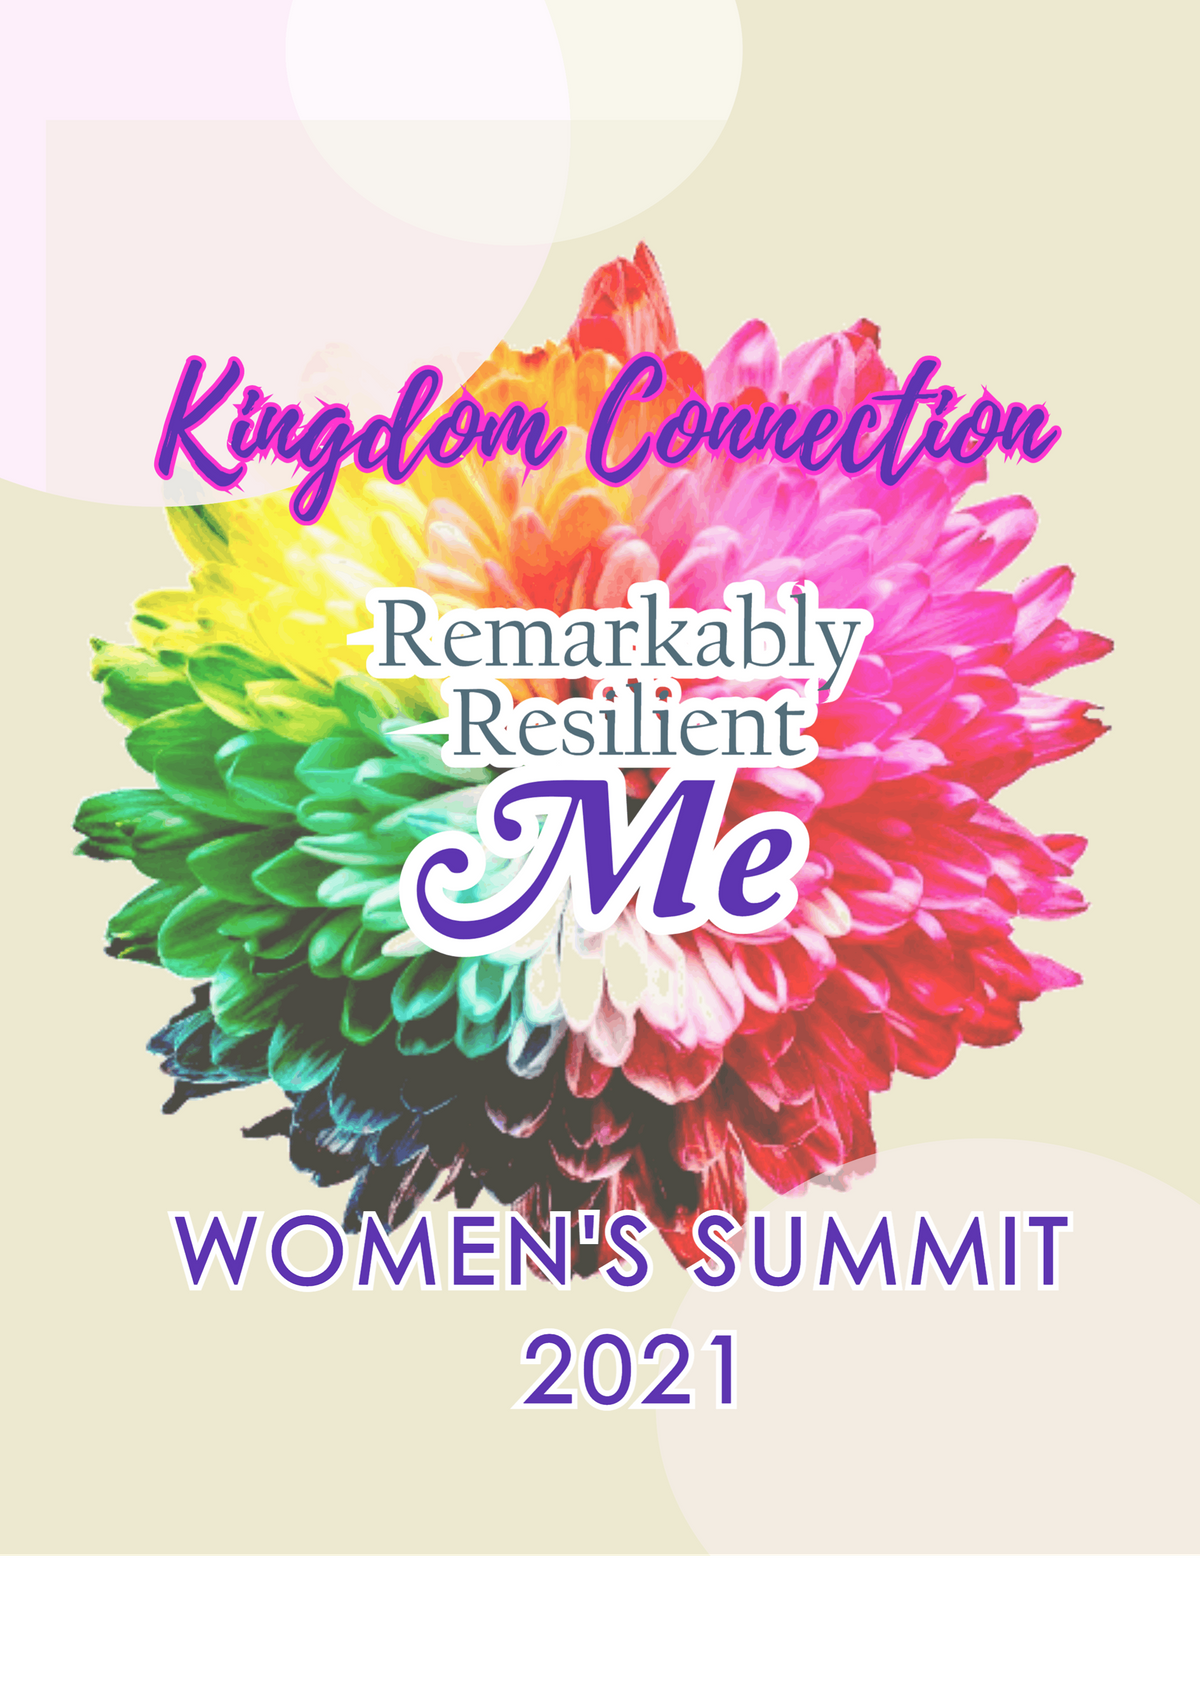 Women's Summit 2021 - Remarkably Resilient Me!